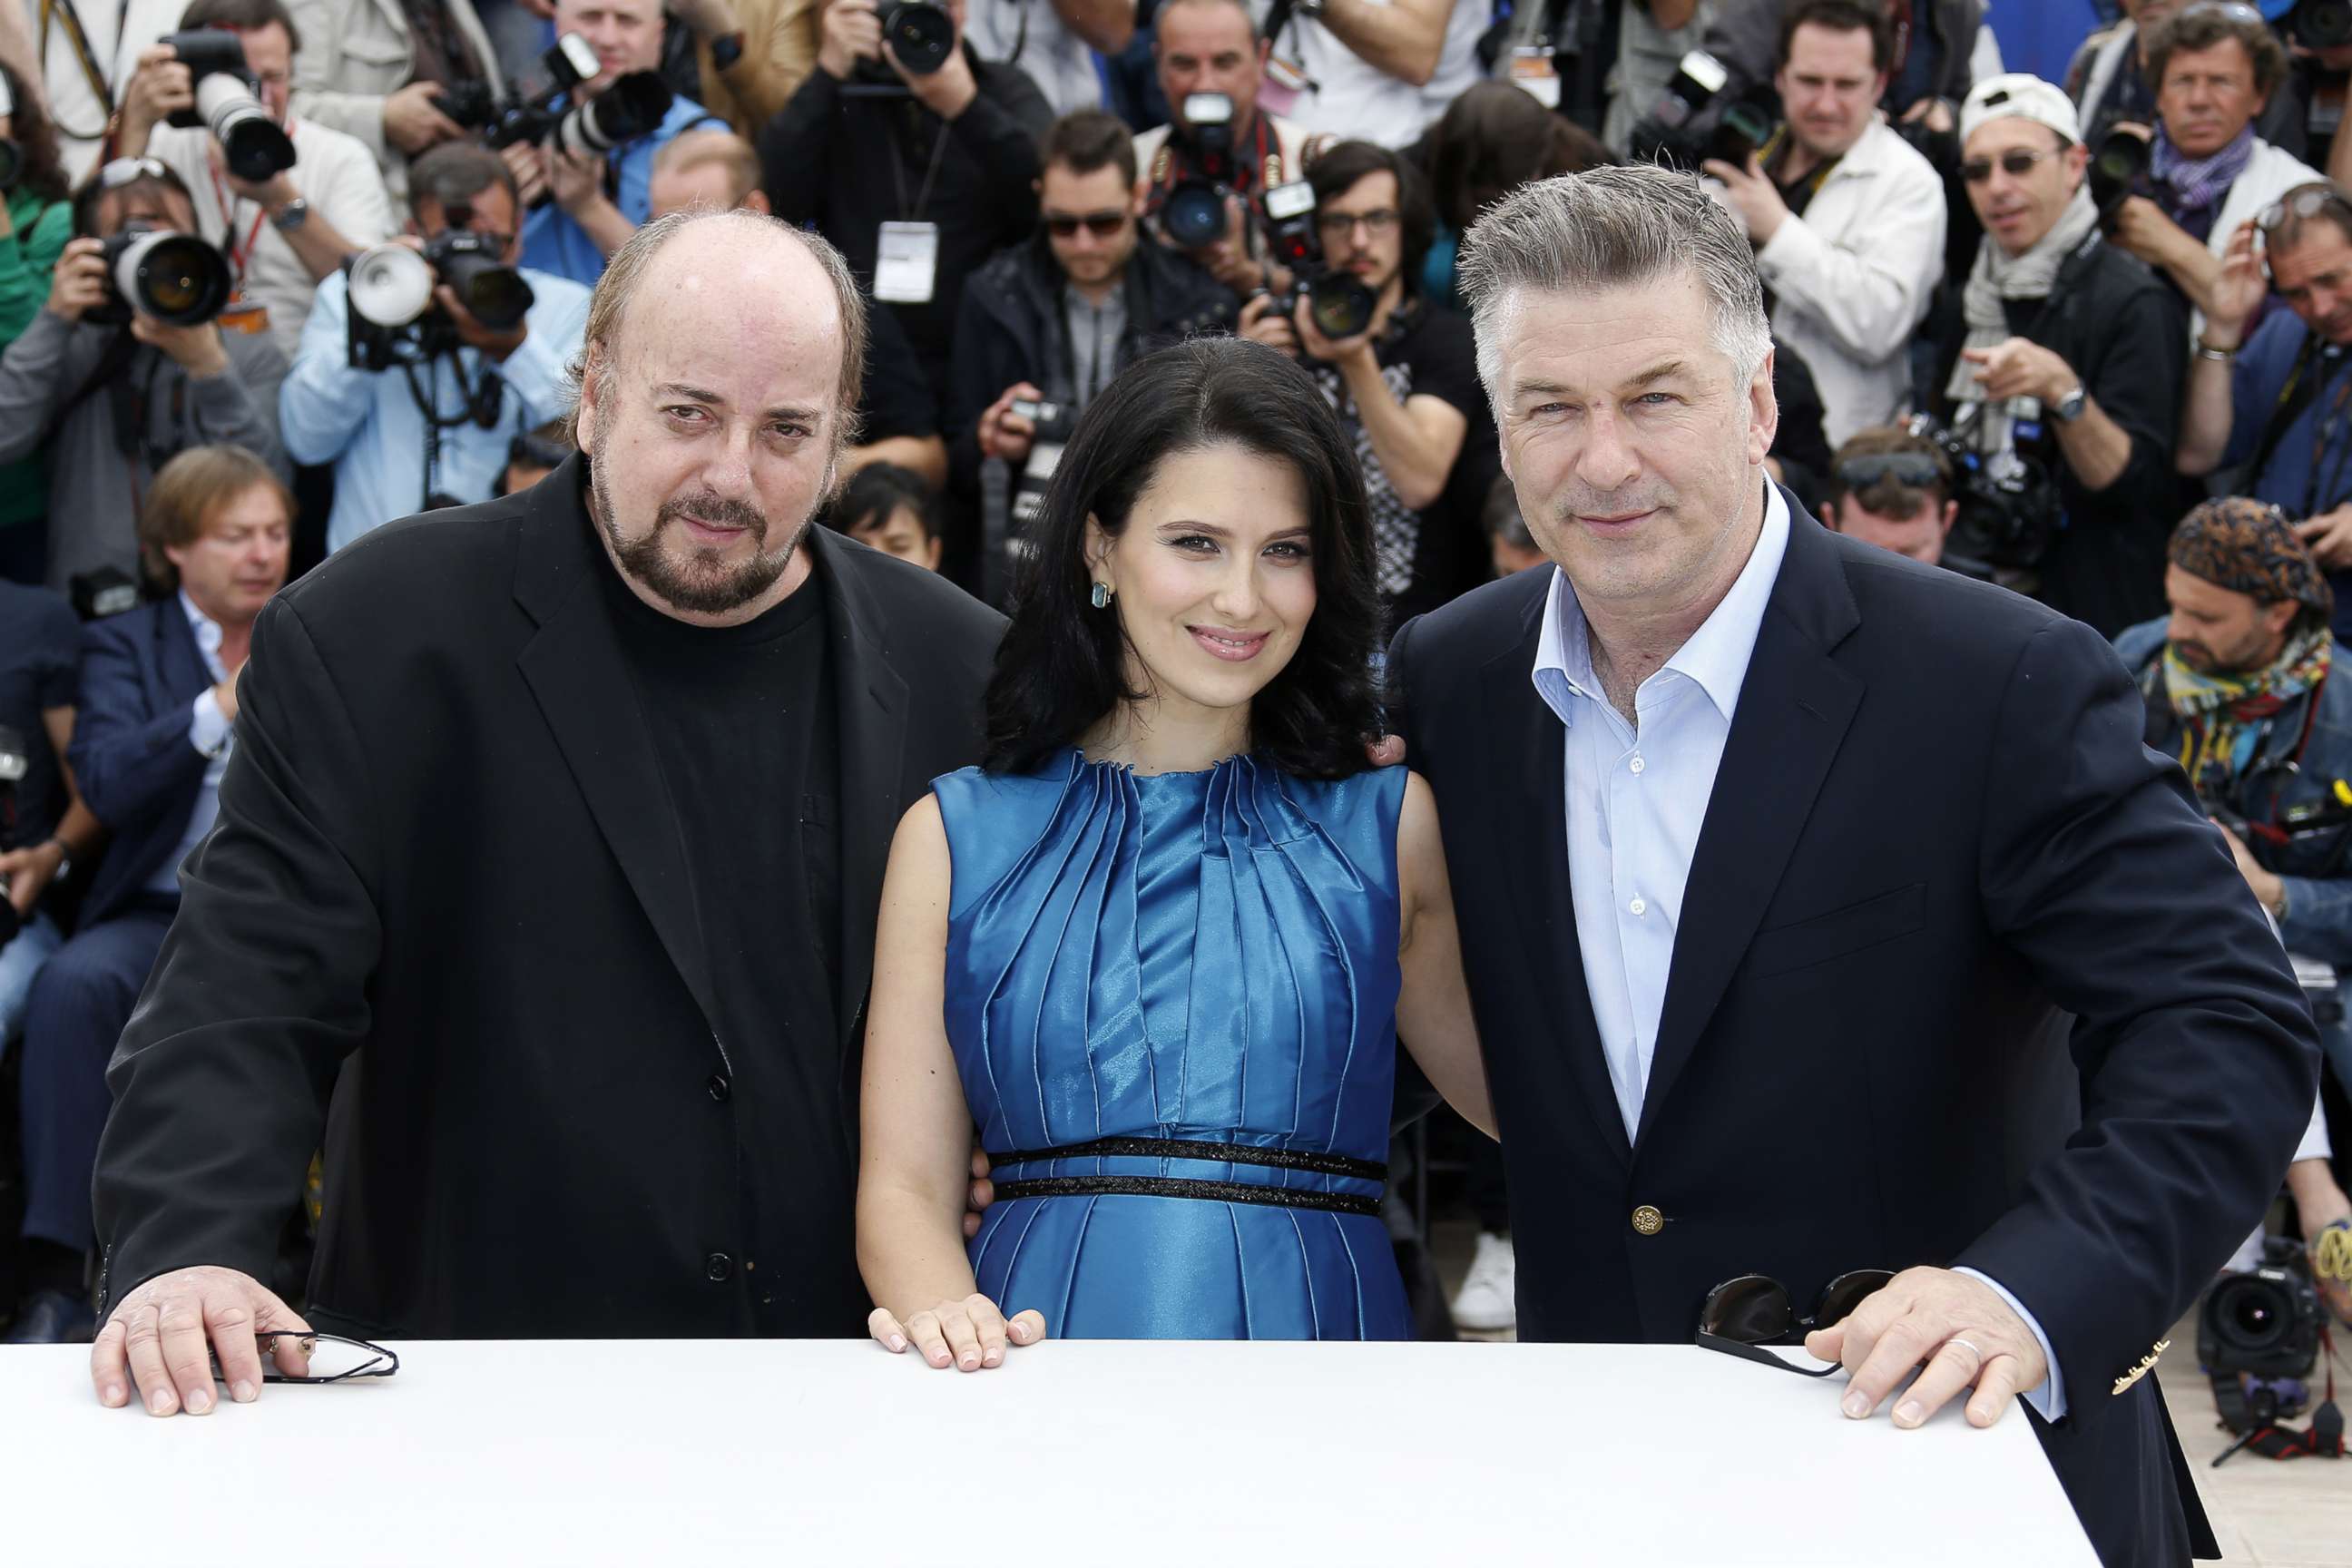 PHOTO: Alec Baldwin (R) poses with his wife Hilaria Thomas (C) and director James Toback during a photocall for the film 'Seduced and Abandoned' at the 66th edition of the Cannes Film Festival in Cannes, May 21, 2013. 